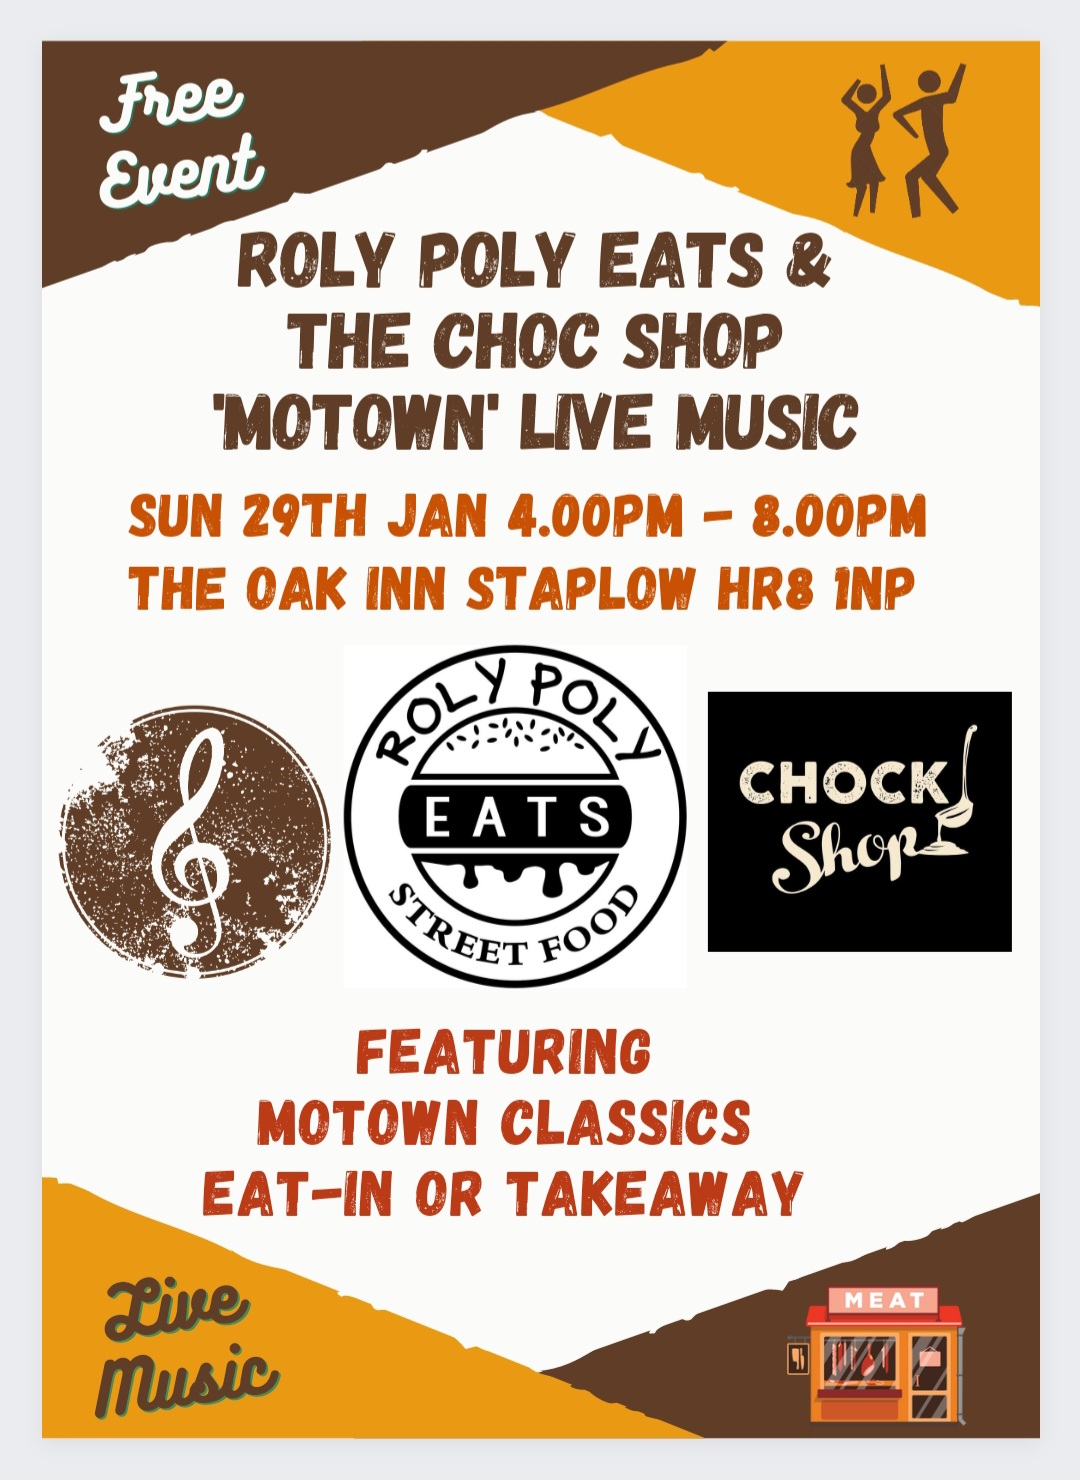 FREE LIVE MUSIC EVENT & ROLY POLY EATS at The Oak Inn Staplow Ledbury, Herefordshire